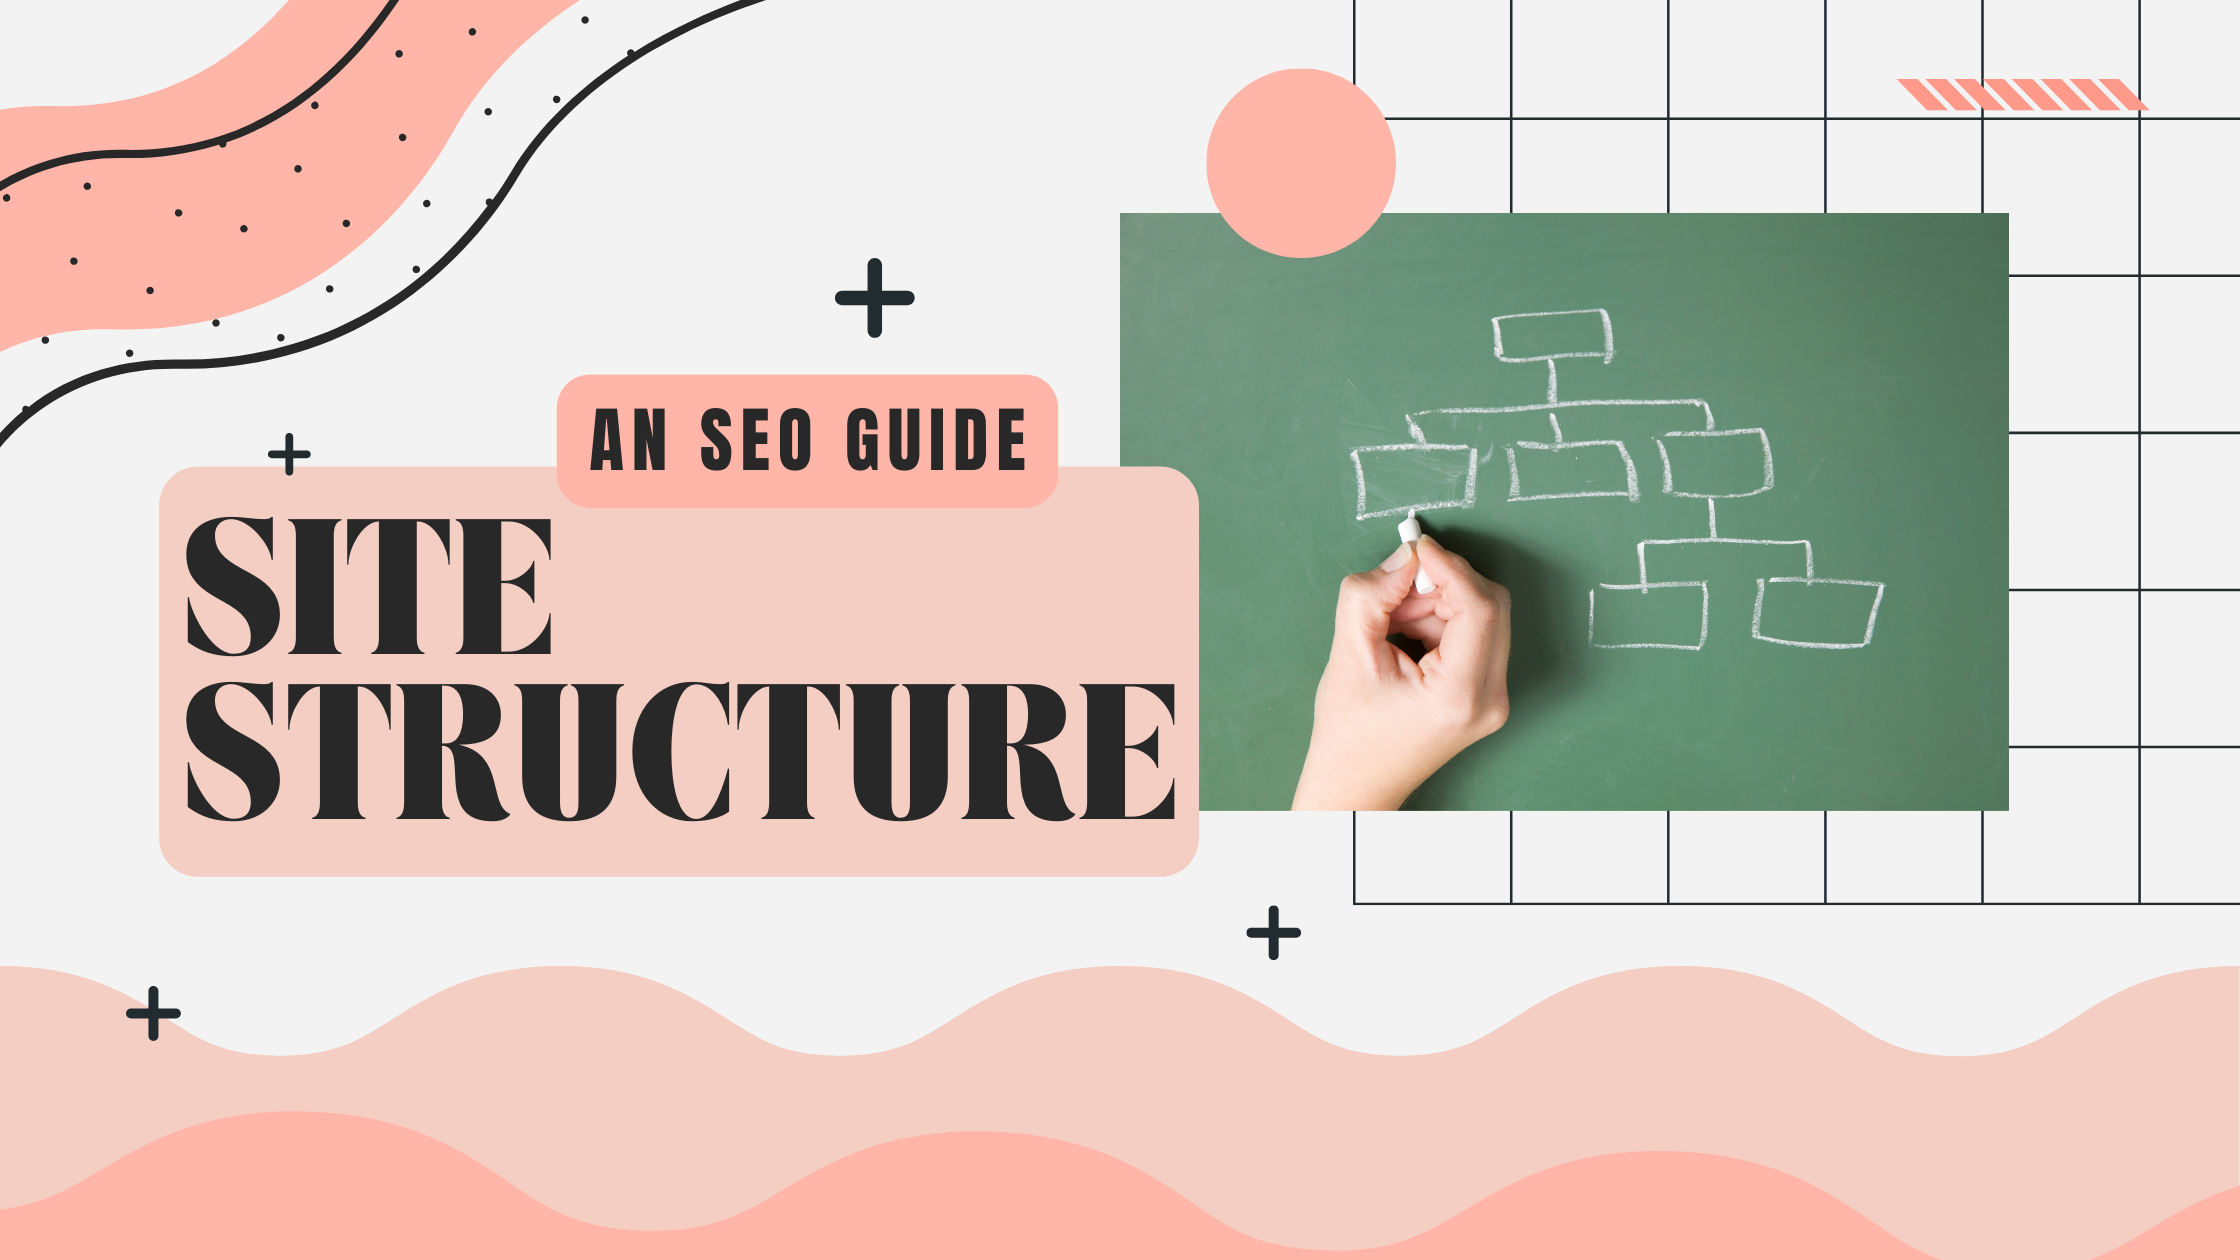 an seo guide for site structure